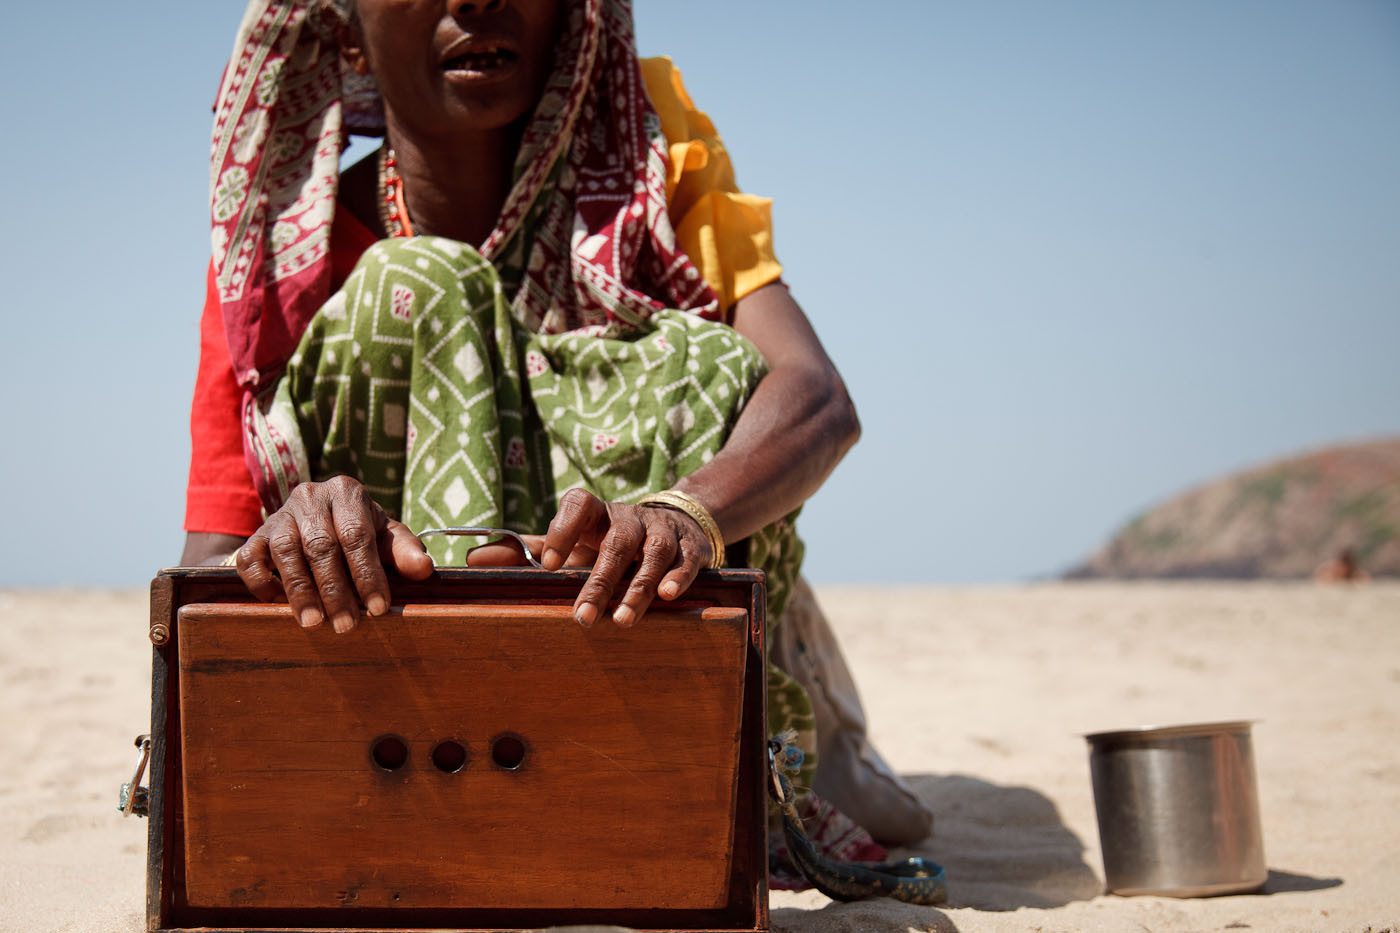 Indian woman singing on the beach for money in Gokarn, India